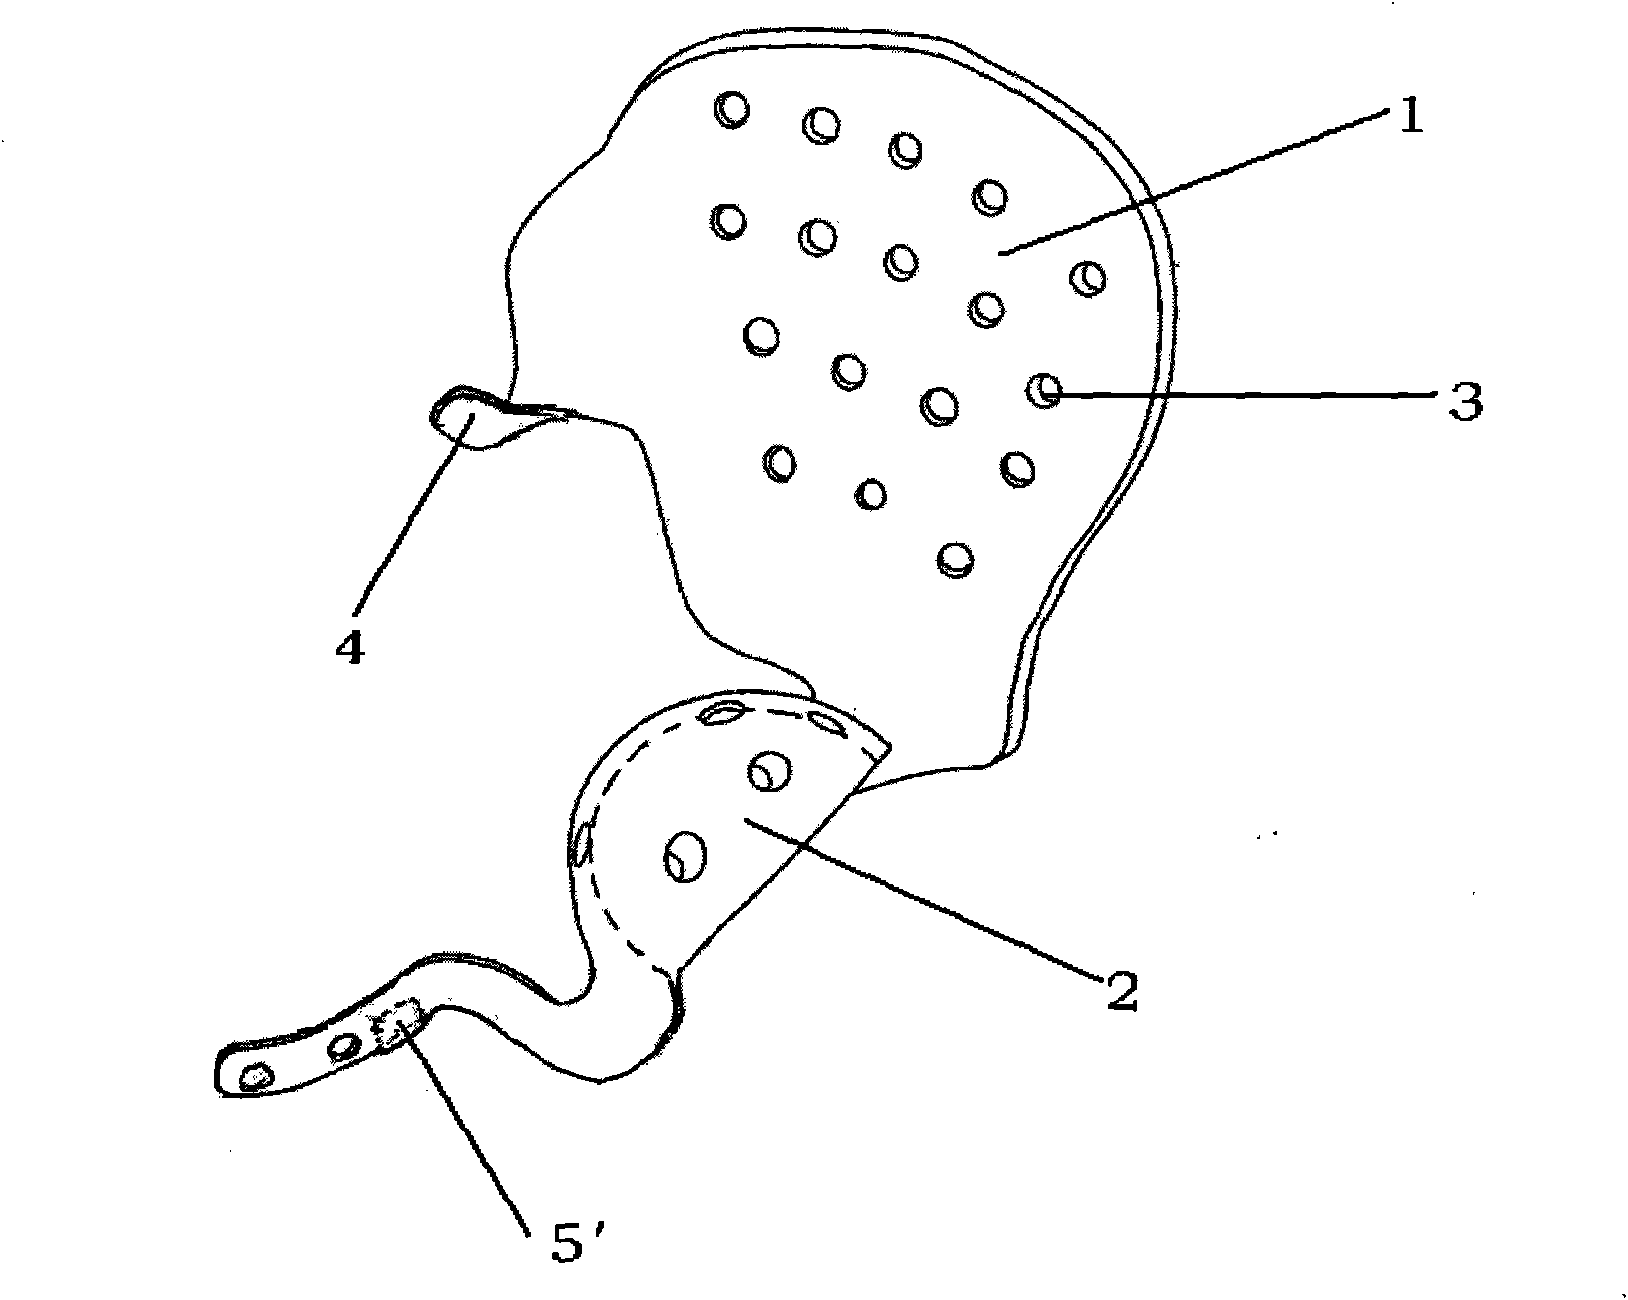 Artificial half pelvic prosthesis with support structure